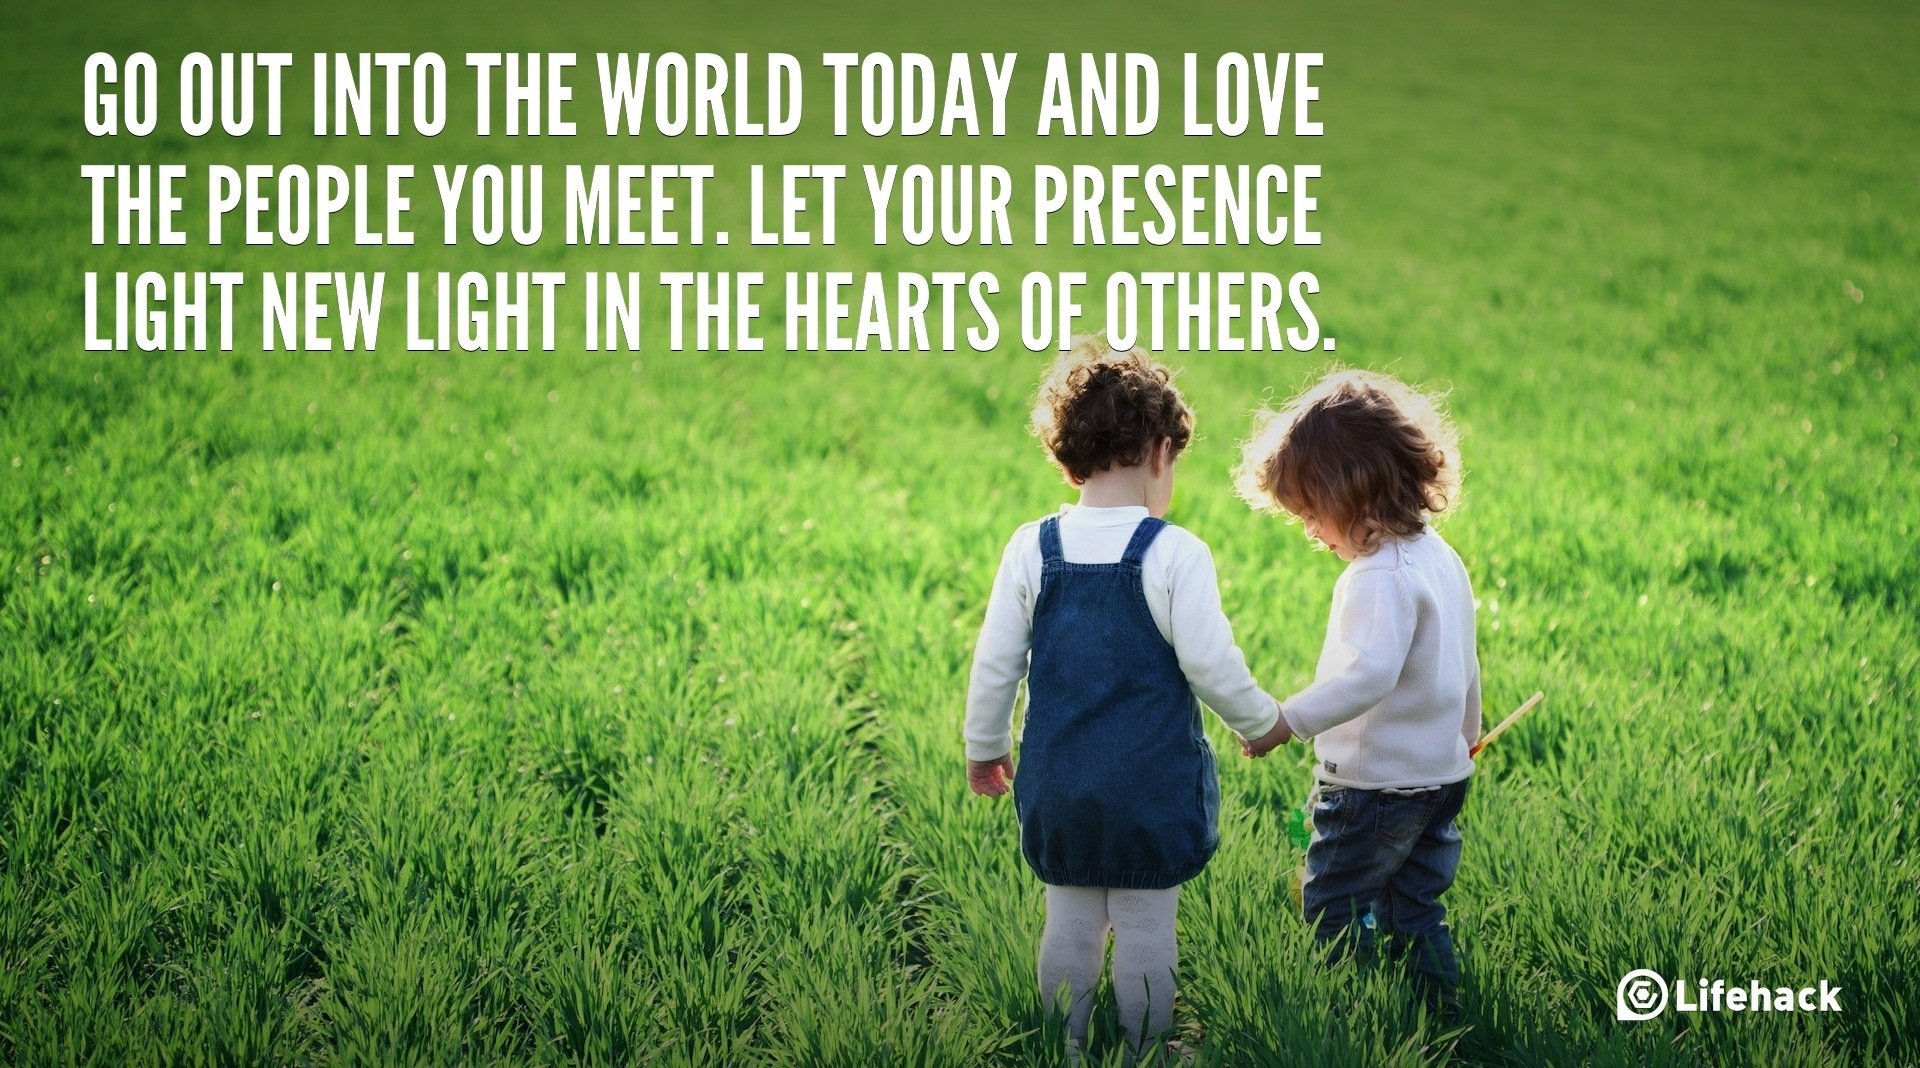 30sec Tip: Go out into the World Today and Love the People You Meet